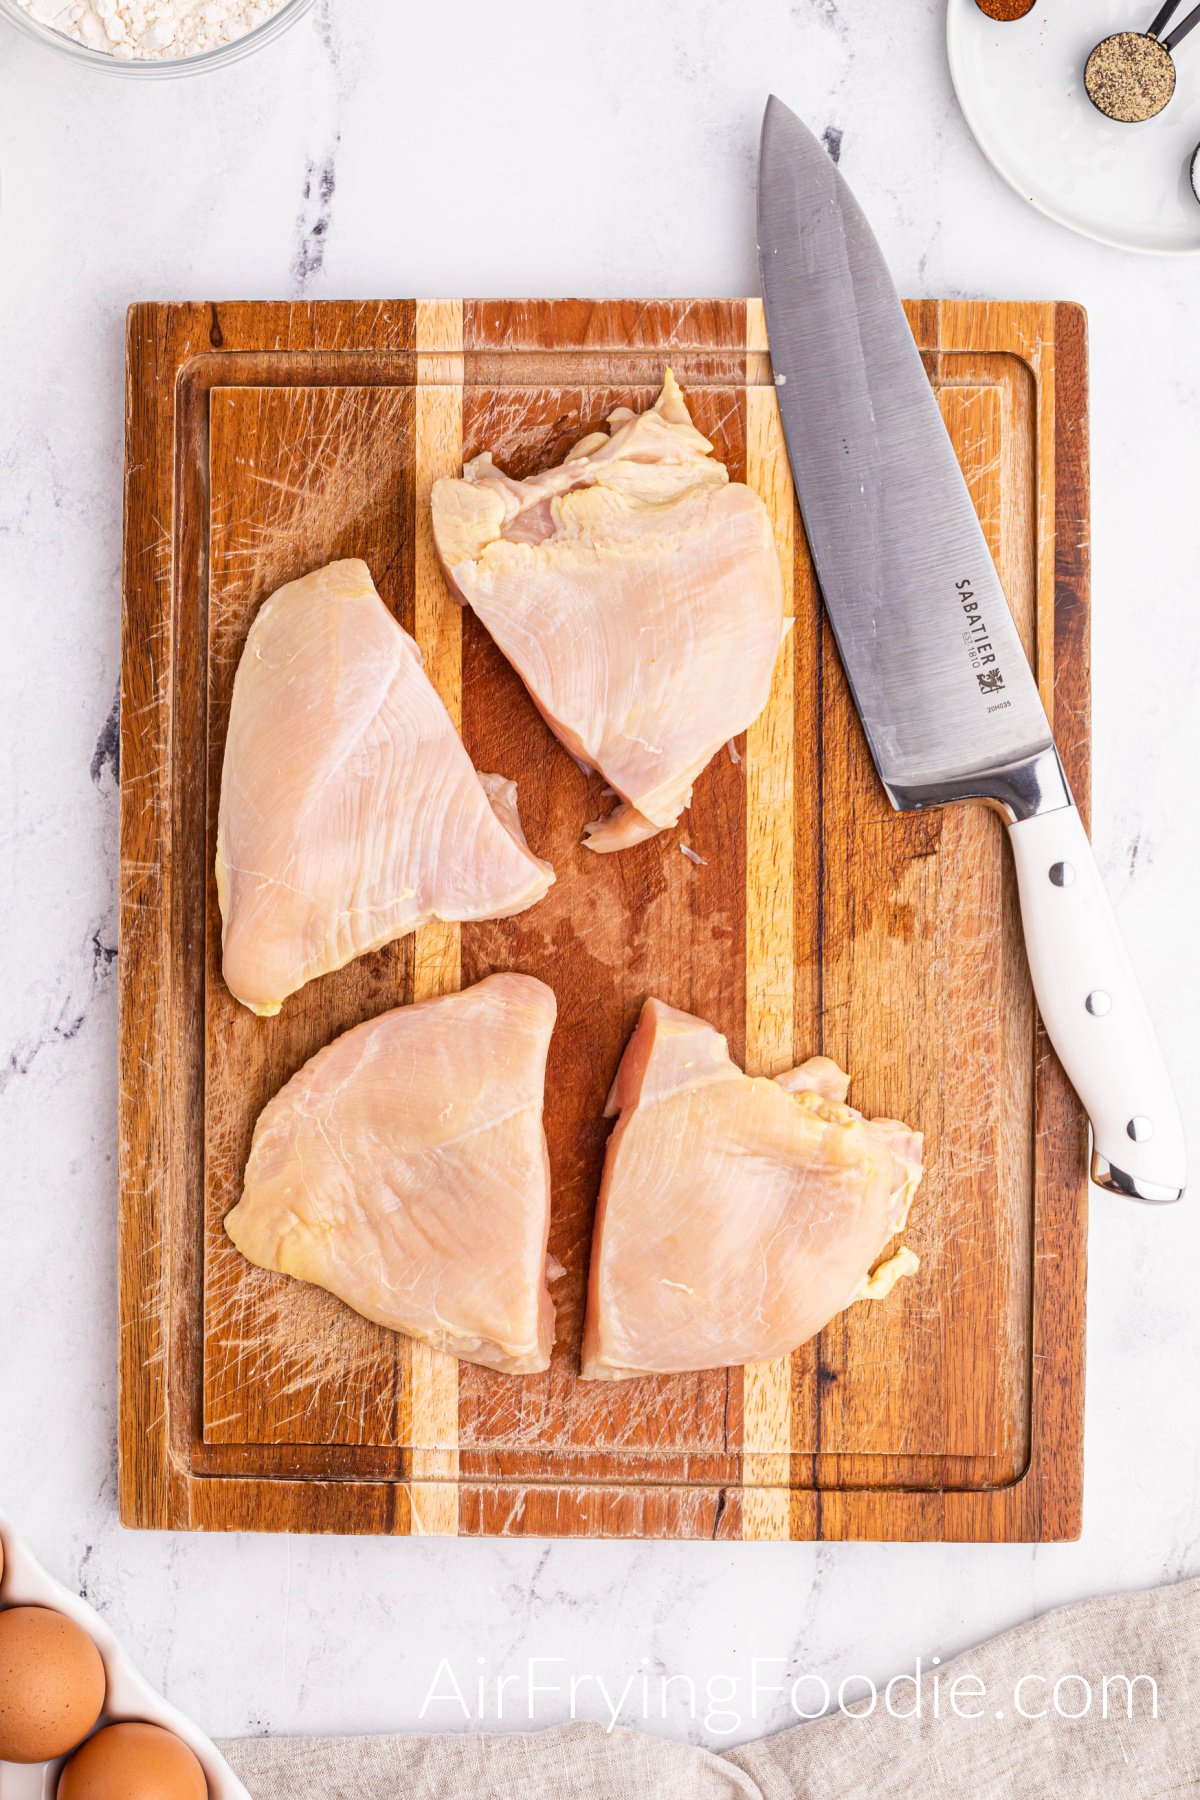 A picture of the two raw chicken breasts on a cutting board cut in half with a knife lying on the cutting board at an angle.